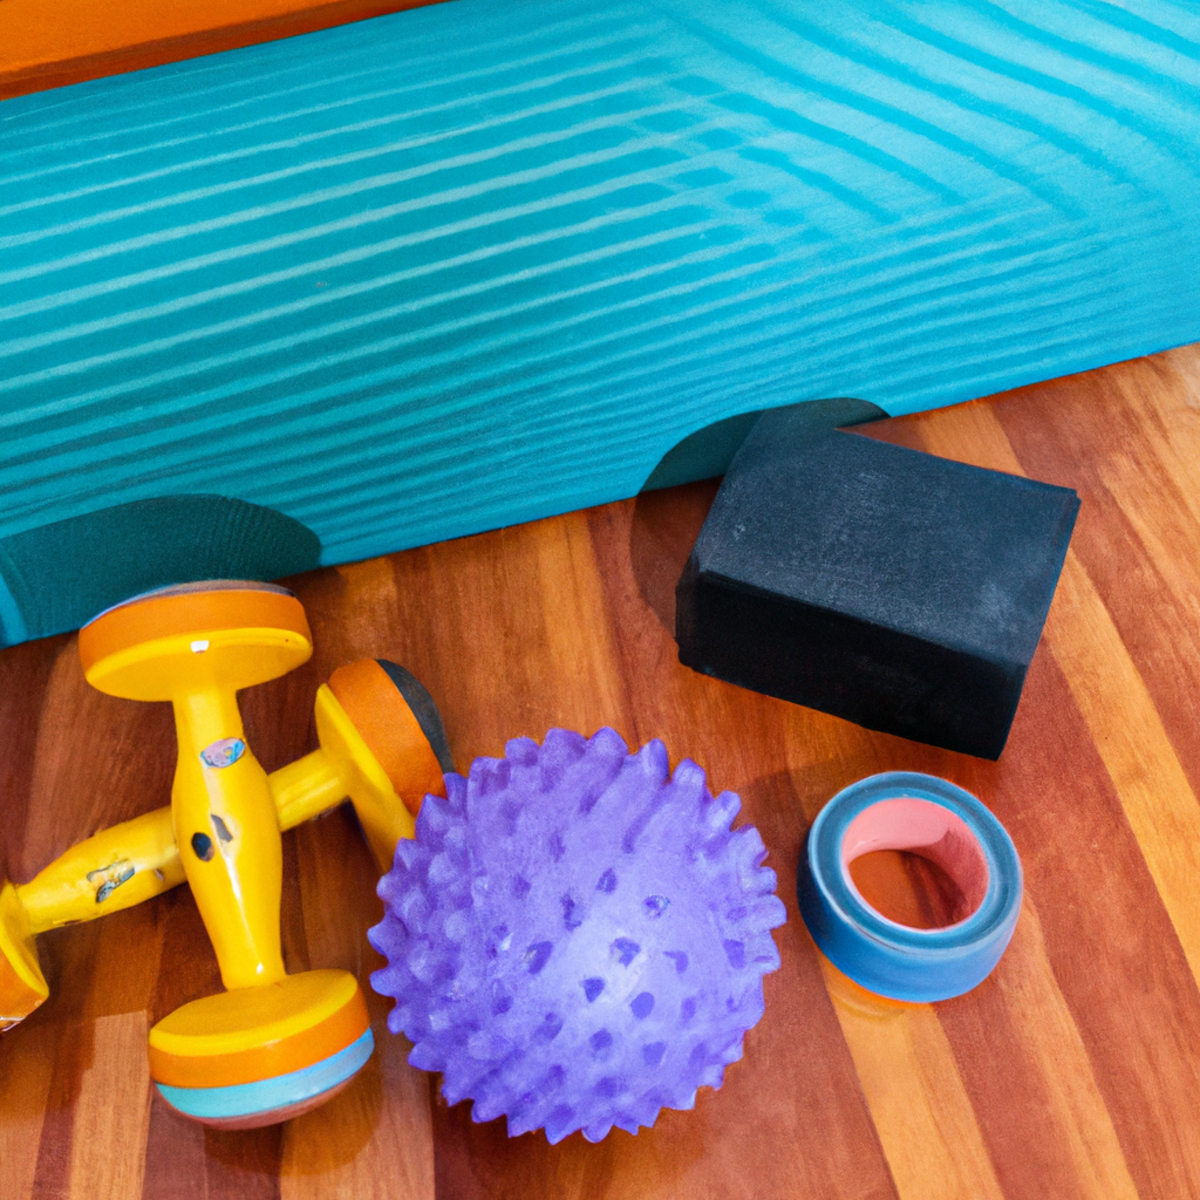 The photo depicts a set of objects arranged on a wooden board. On one side, there is a small medicine ball, a resistance band, and a foam roller. On the other side, there is a pair of dumbbells, a balance board, and a yoga block. The objects are arranged in a way that suggests they are part of a balanced exercise routine for seniors. The lighting is soft and natural, highlighting the textures of the objects and the wood grain of the board. The overall effect is one of simplicity and elegance, conveying the message that balance training can be both effective and enjoyable for seniors.